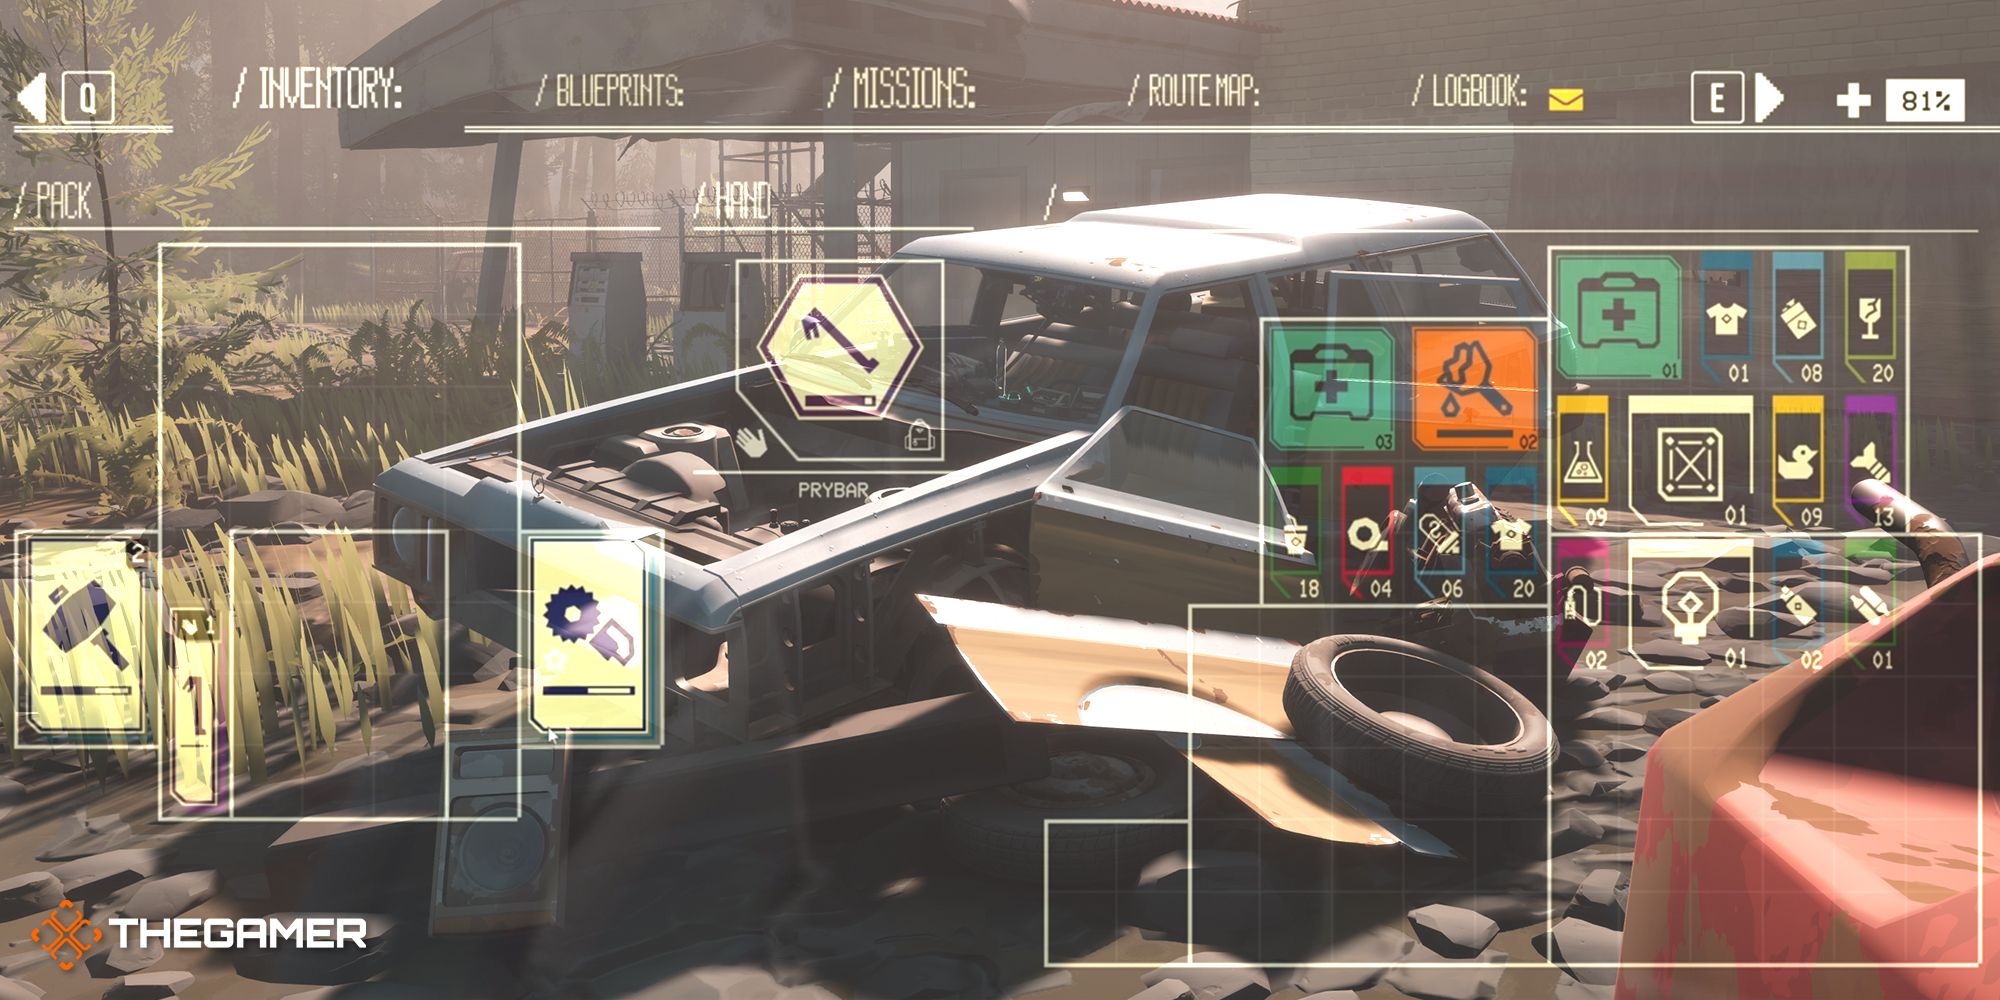 The menus in Pacific Drive superimposed over a car pulled over on the side of the road near a gas station surrounded by scrap metal and tires